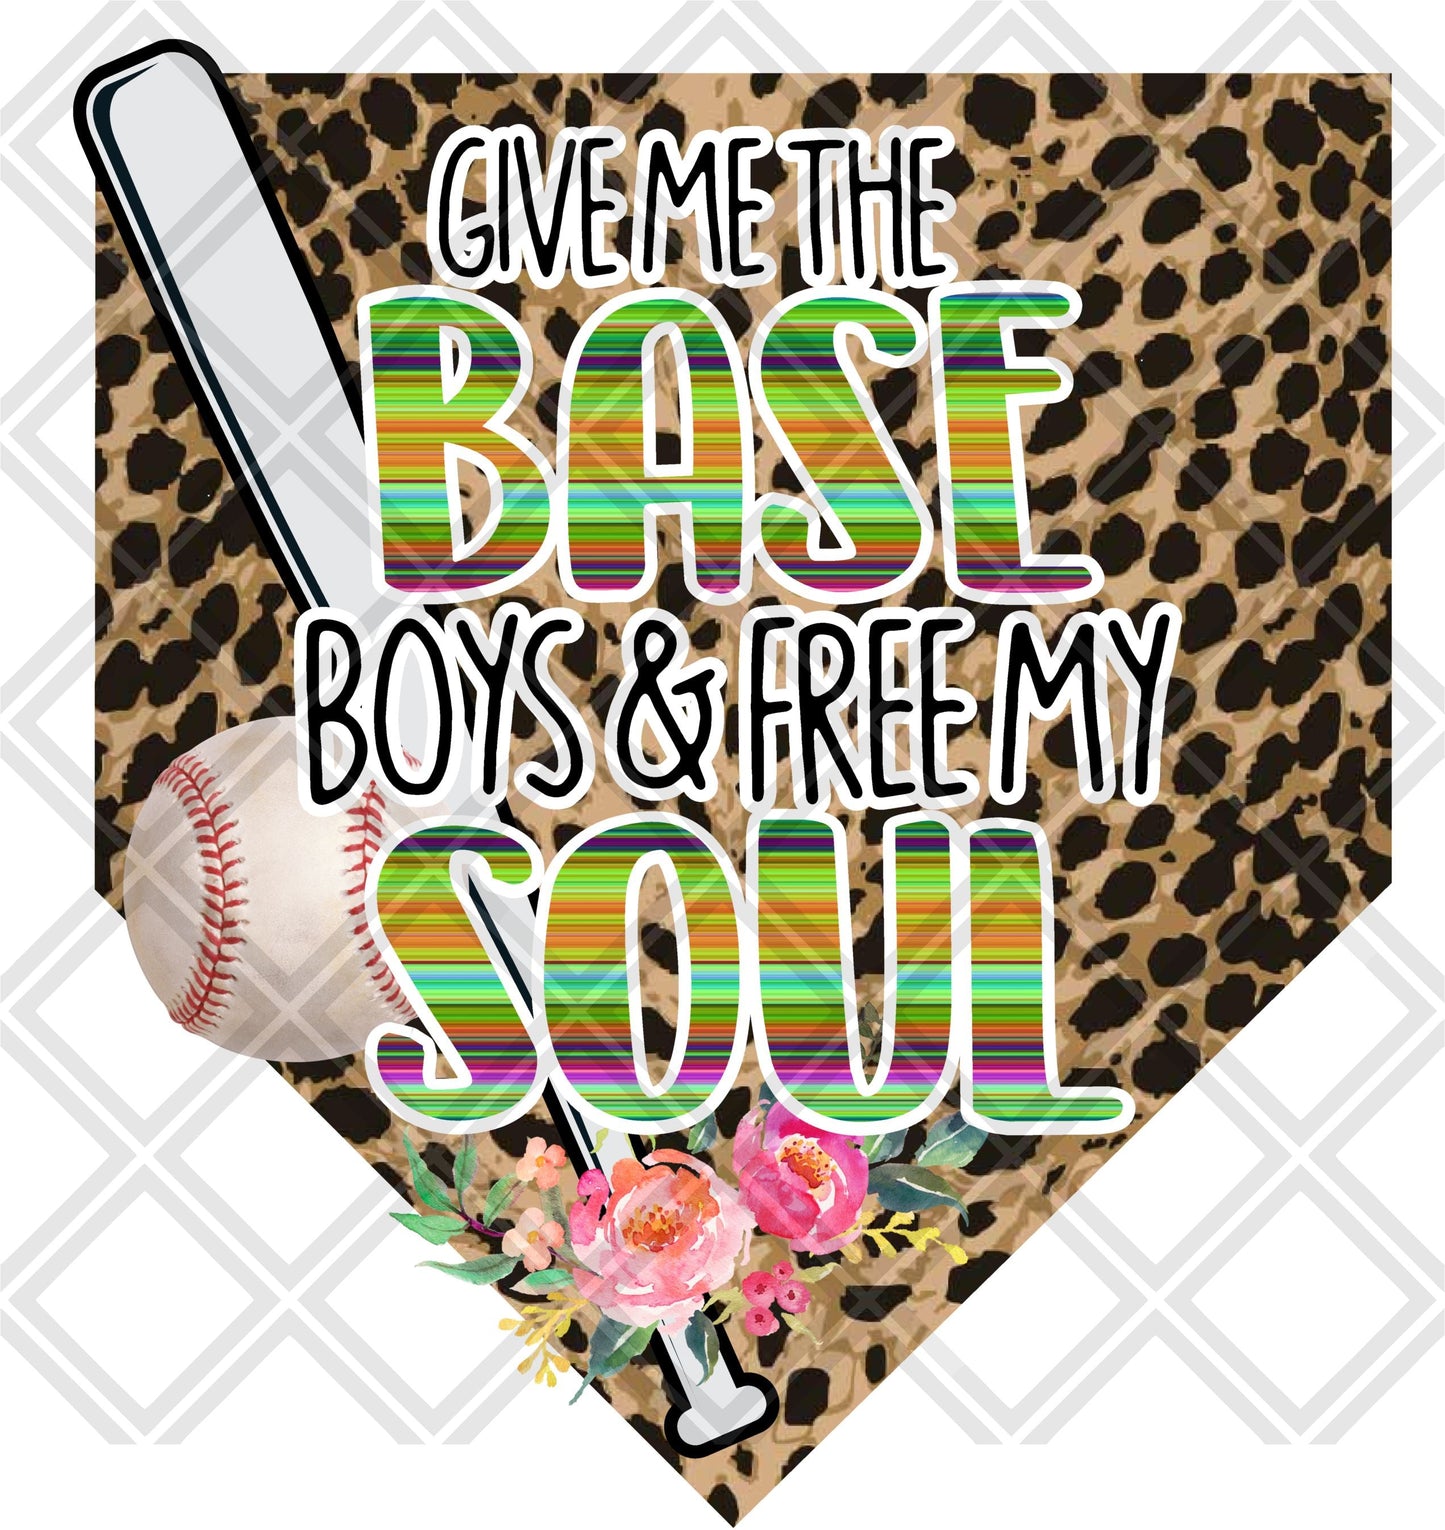 Give me the base boys and free my soul baseball DTF TRANSFERPRINT TO ORDER